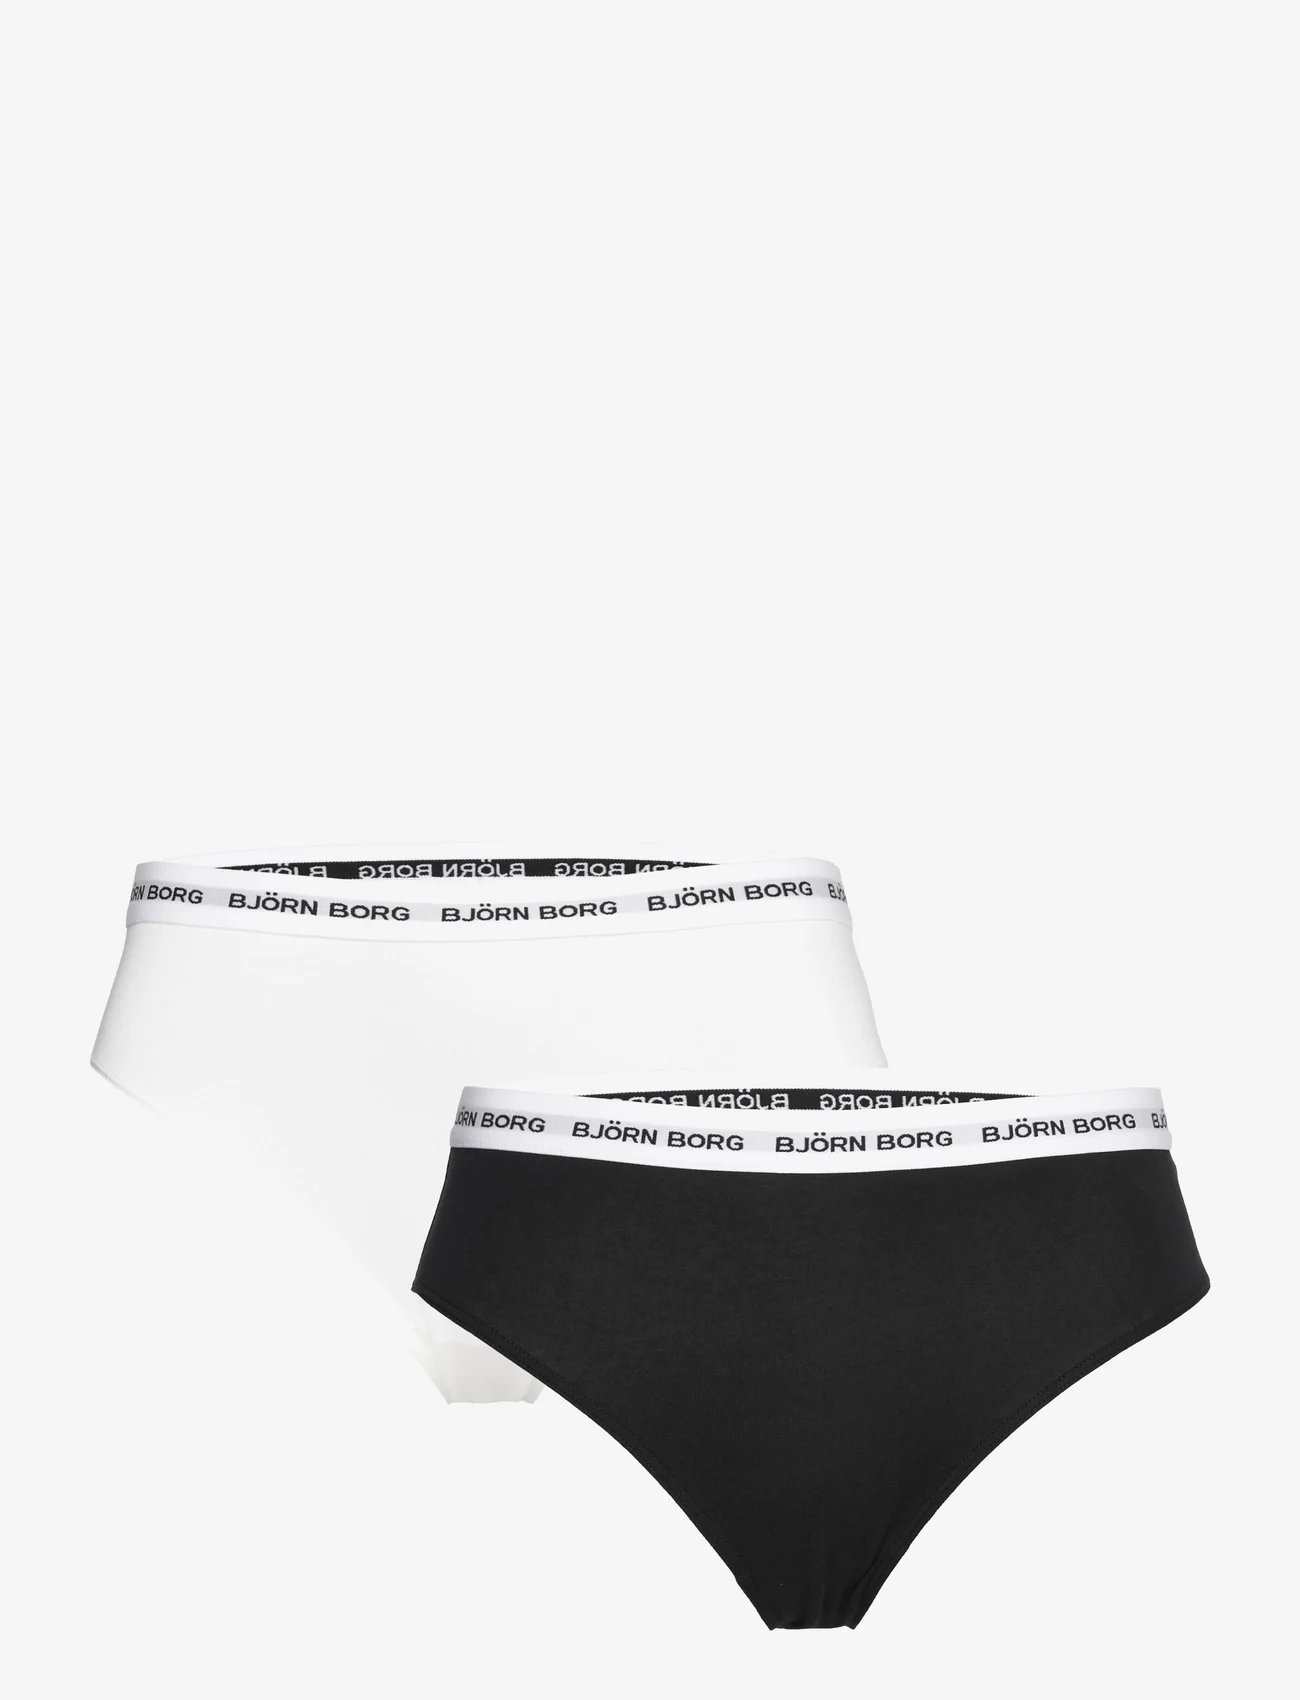 Björn Borg - CORE LOGO HW BRIEF 2p - lowest prices - multipack 1 - 0